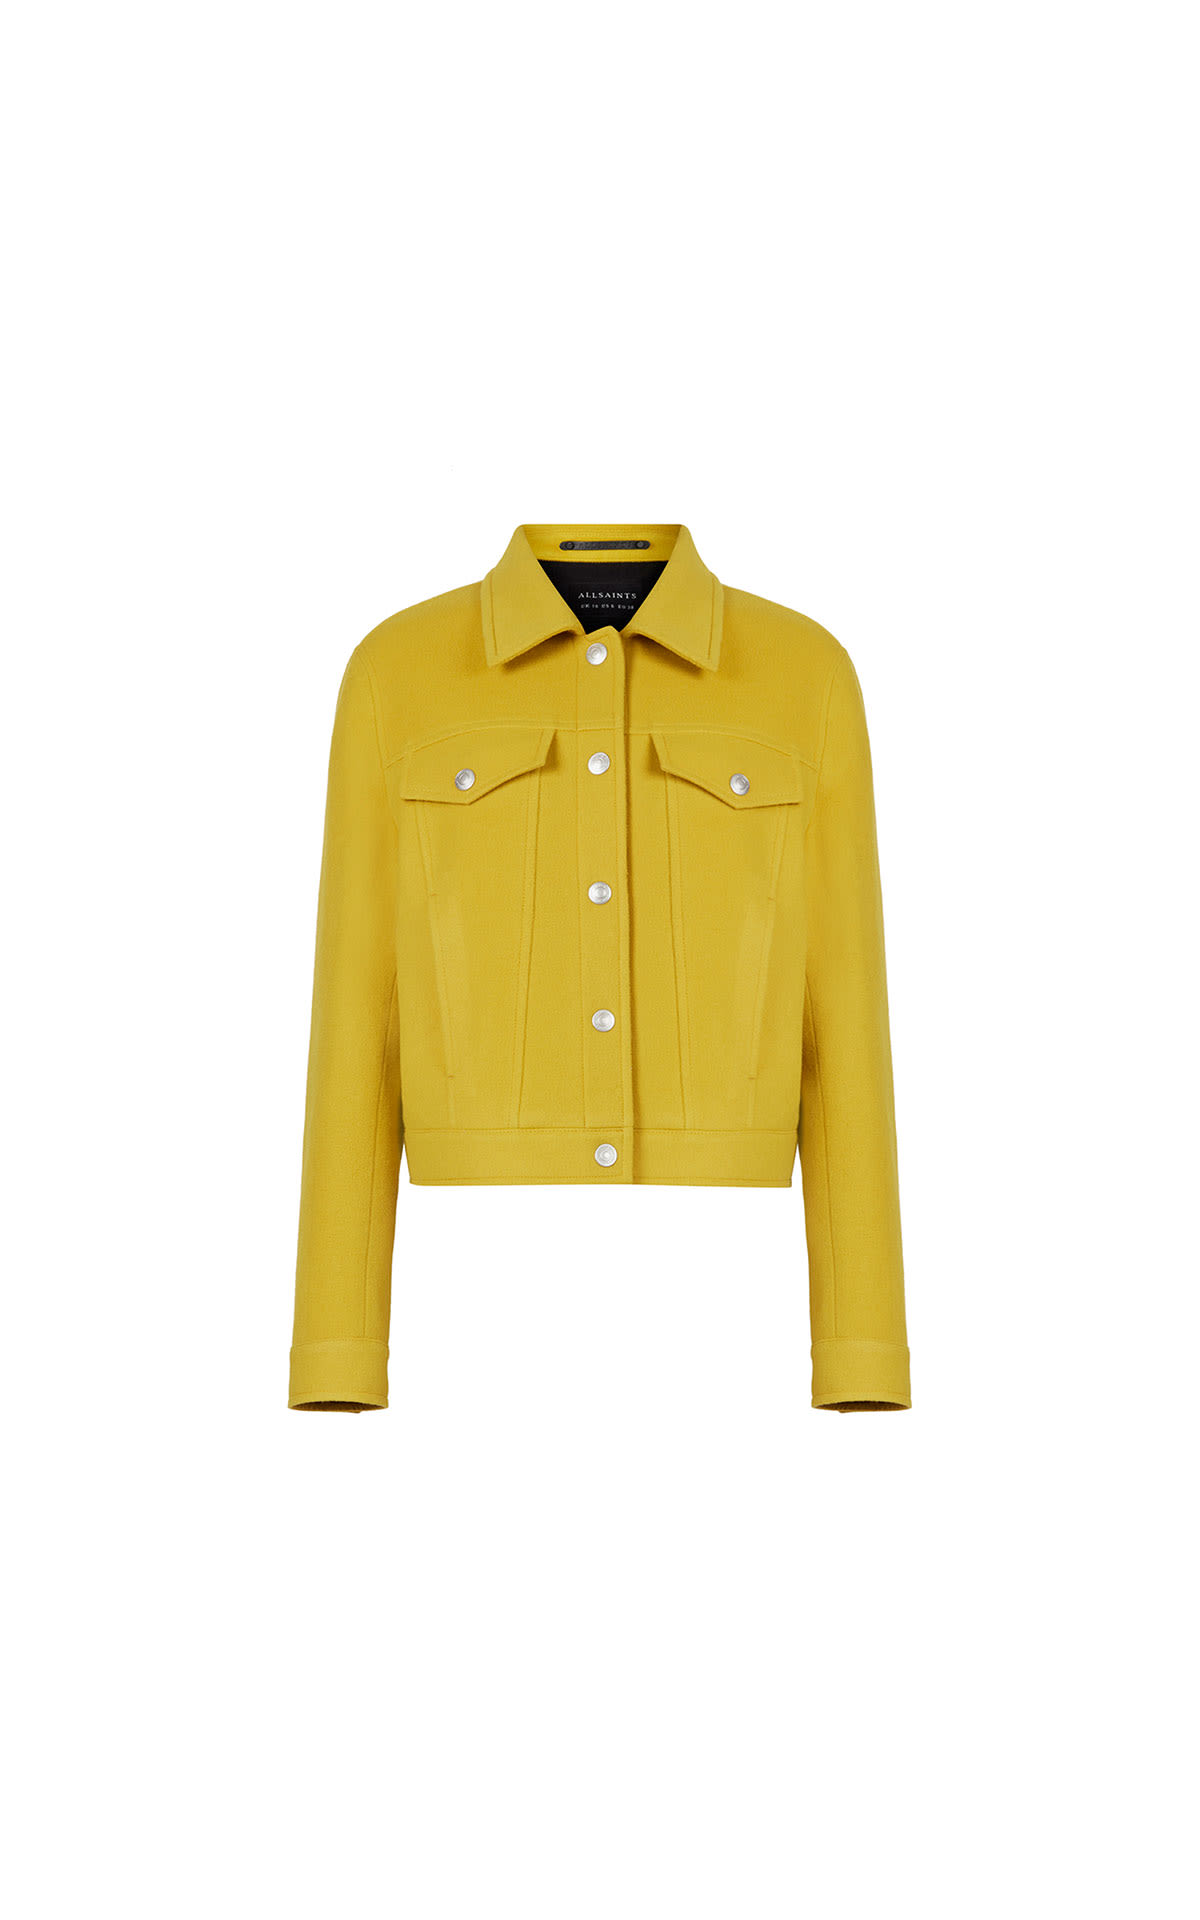 AllSaints Acey jacket chartreuse green from Bicester Village